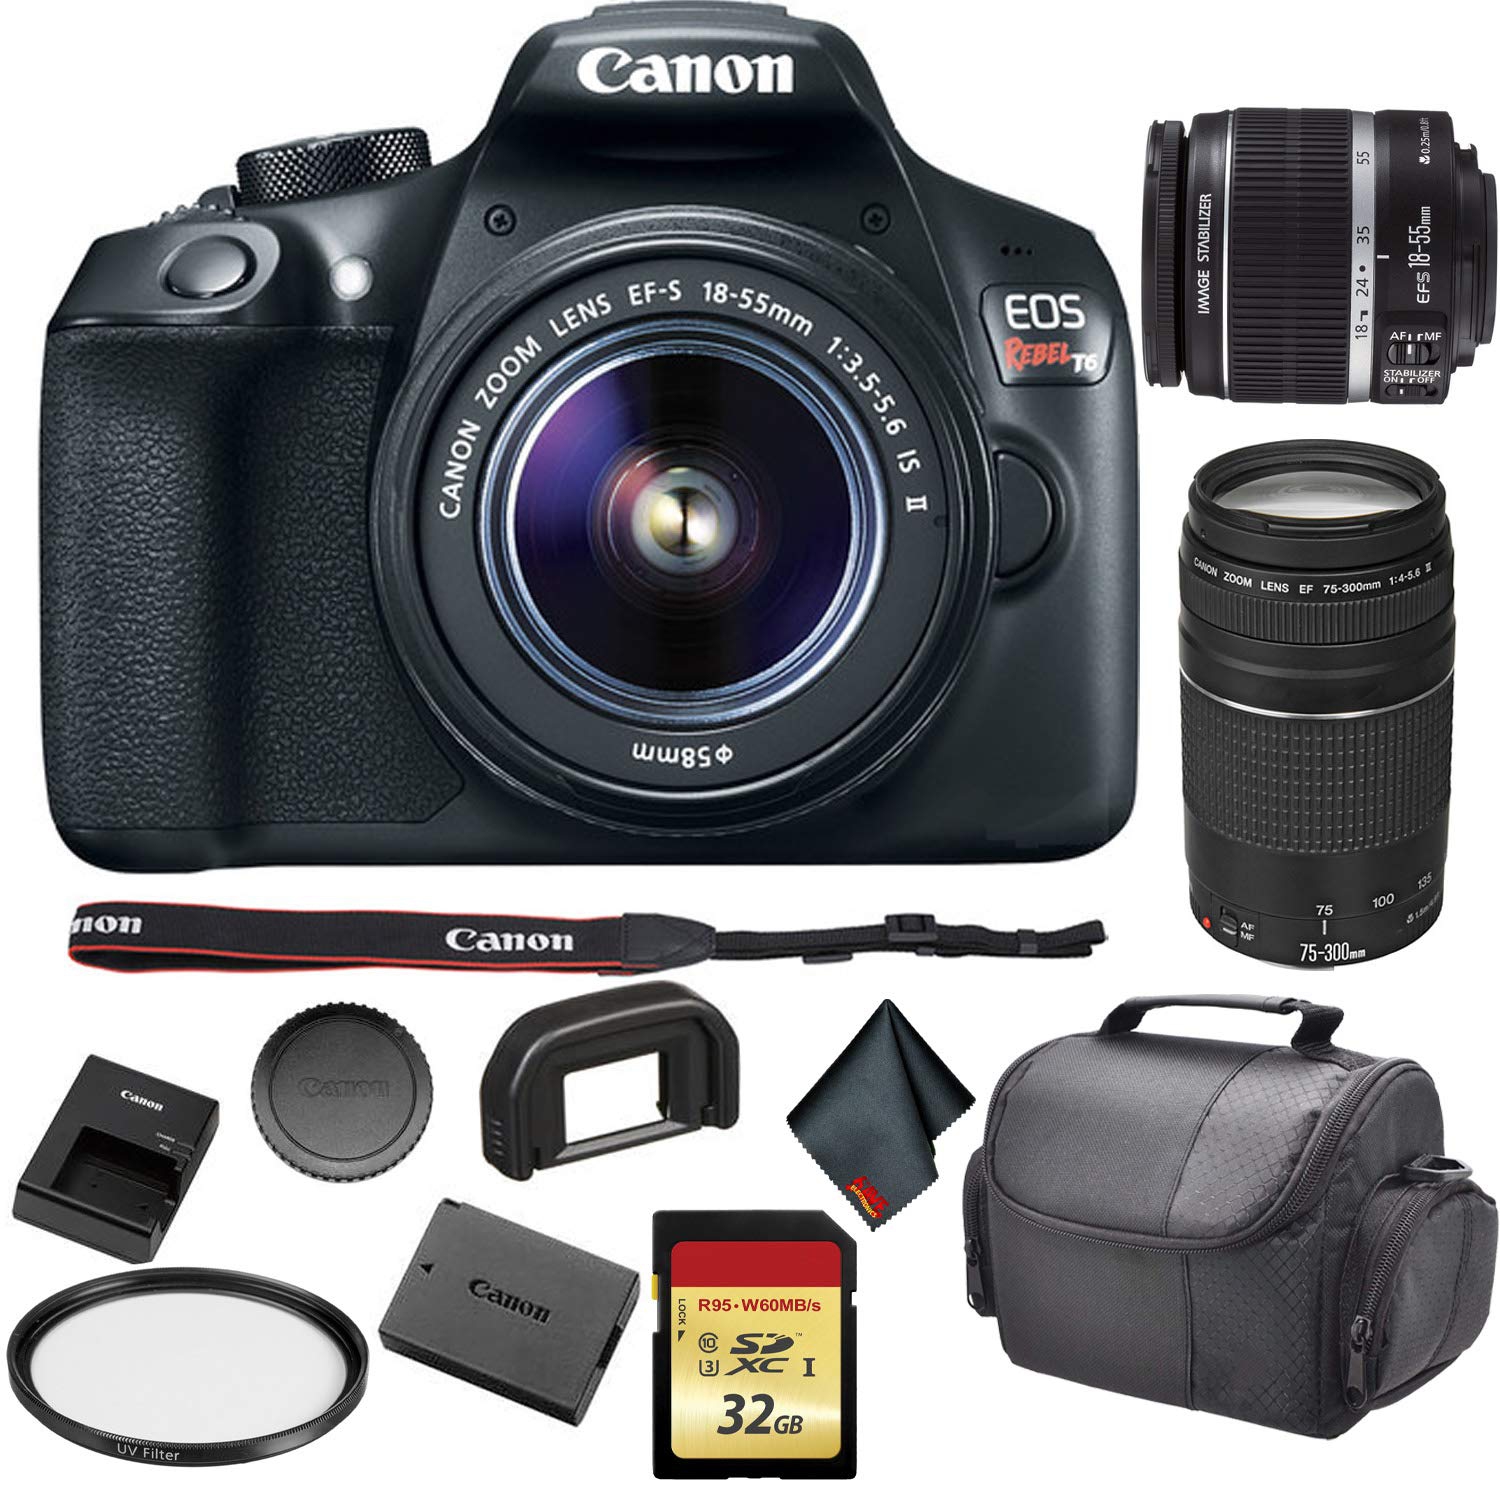 Canon EOS Rebel T6 DSLR Camera with 18-55mm Lens 1159C003 Bundle with Canon EF 75-300mm f/4-5.6 III Lens + 32GB Memory C